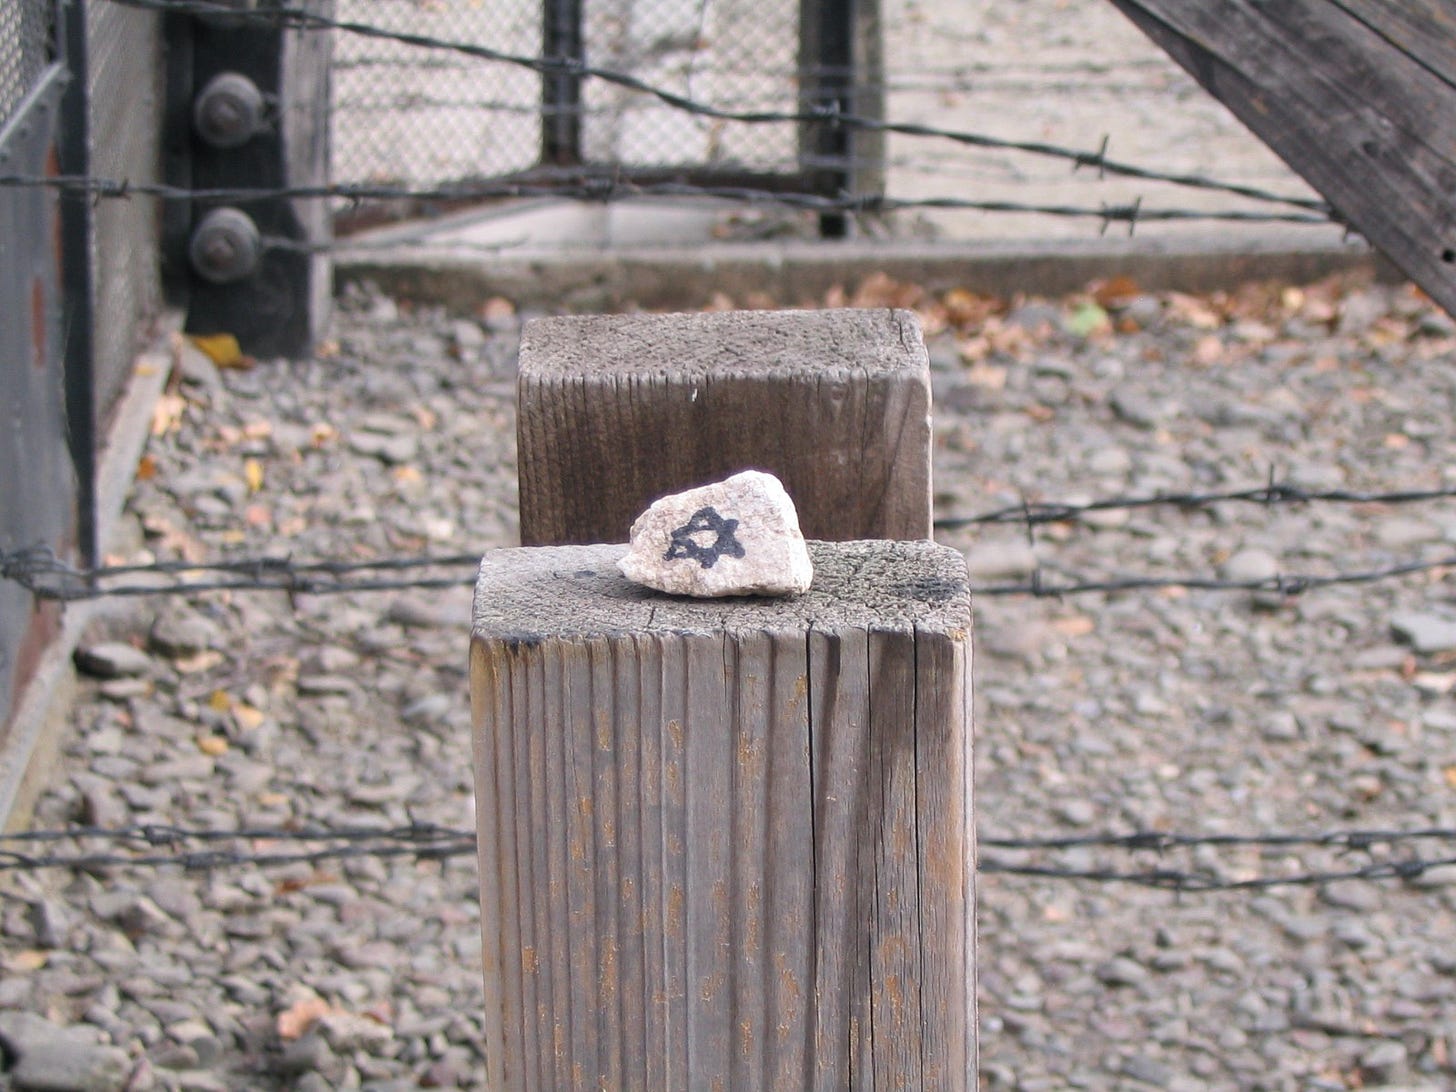 Photo of a small stone with a Star of David drawn on it on top of a fence post, barbed wire fence nearby, at the museum at Auschwitz.